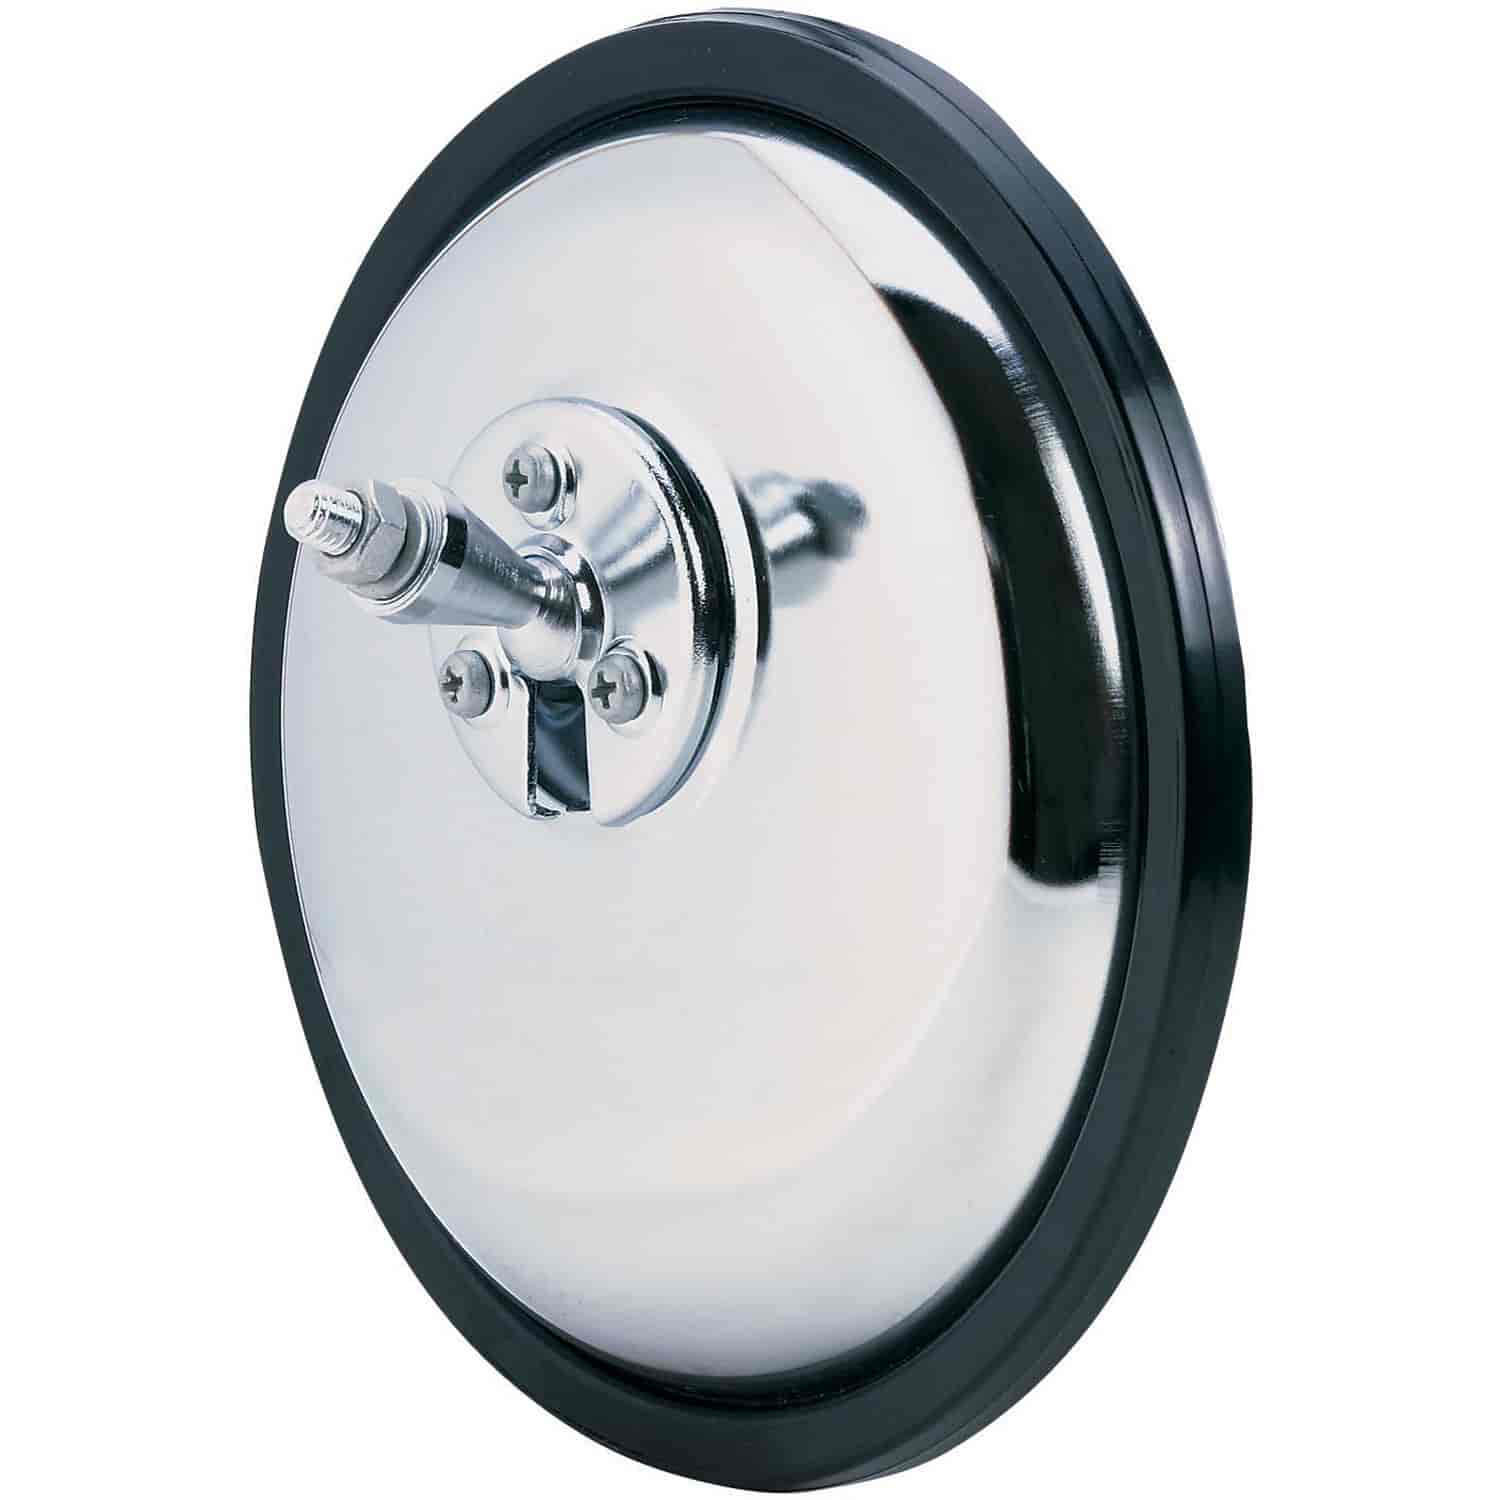 Clamp on Spot Mirror 7 Round w/ Swivel Stud Easy Clamp-on Installation Convex Lens increases visibility.